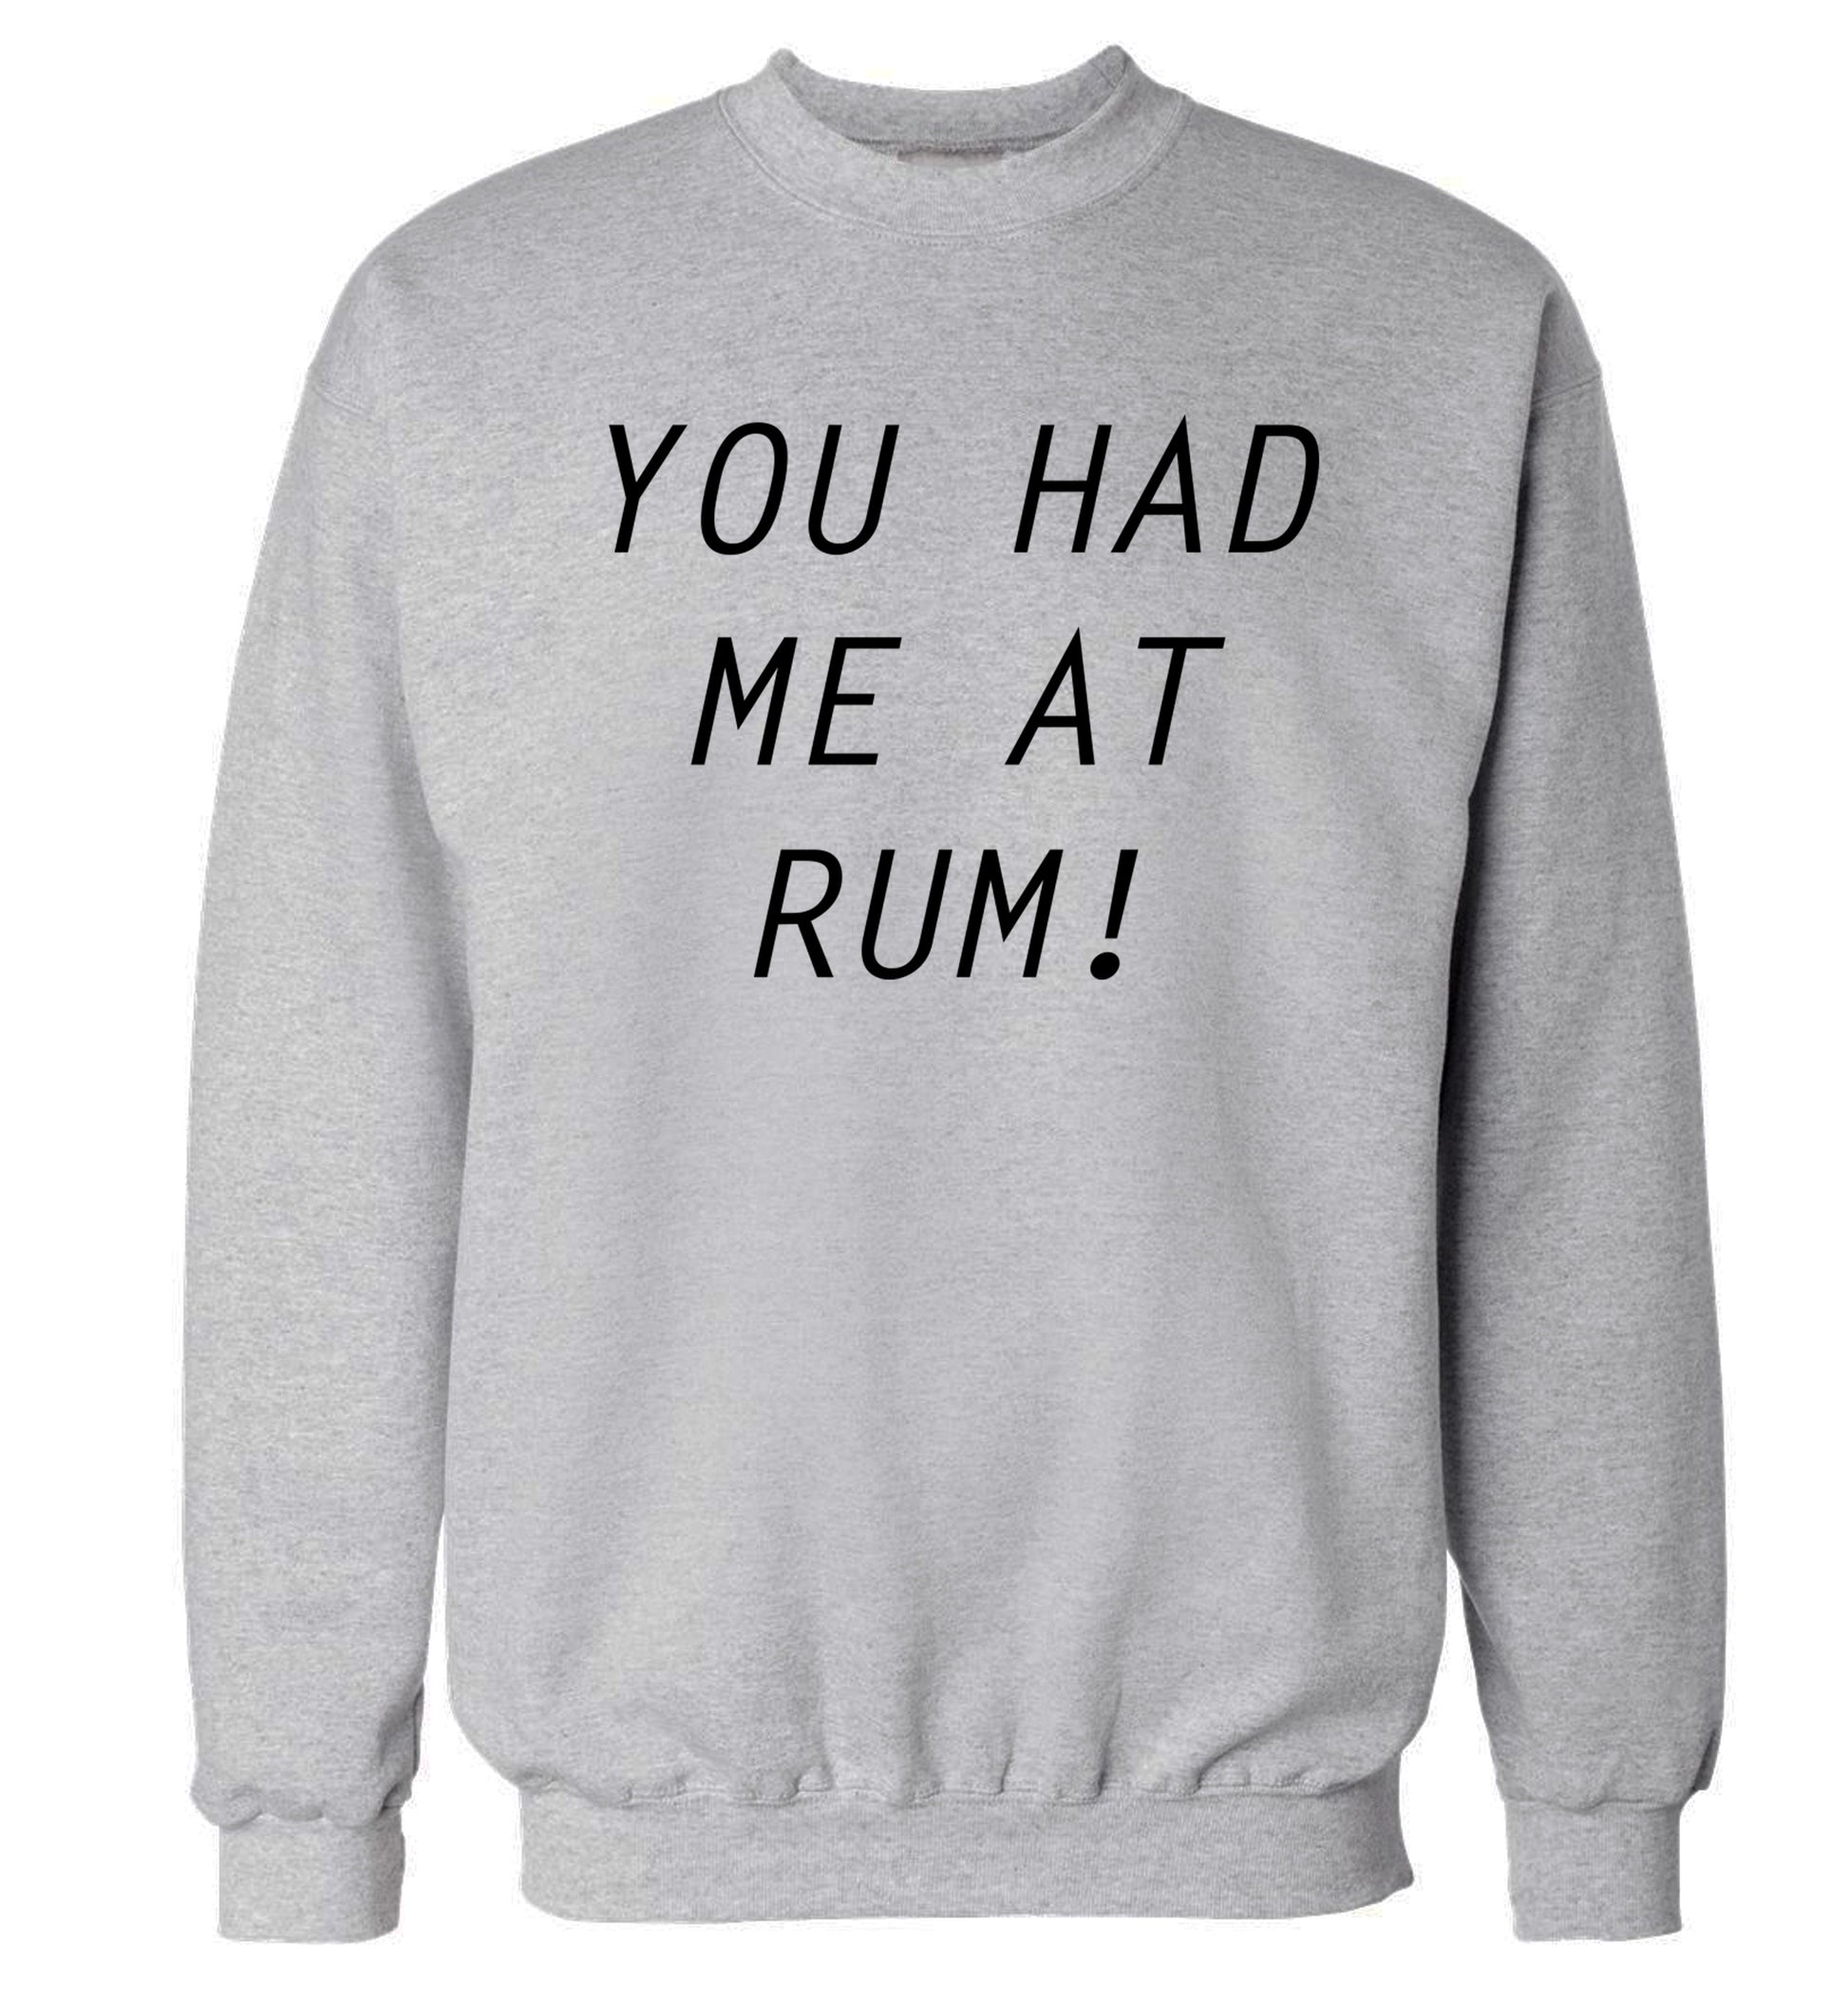 You had me at rum Adult's unisex grey Sweater 2XL